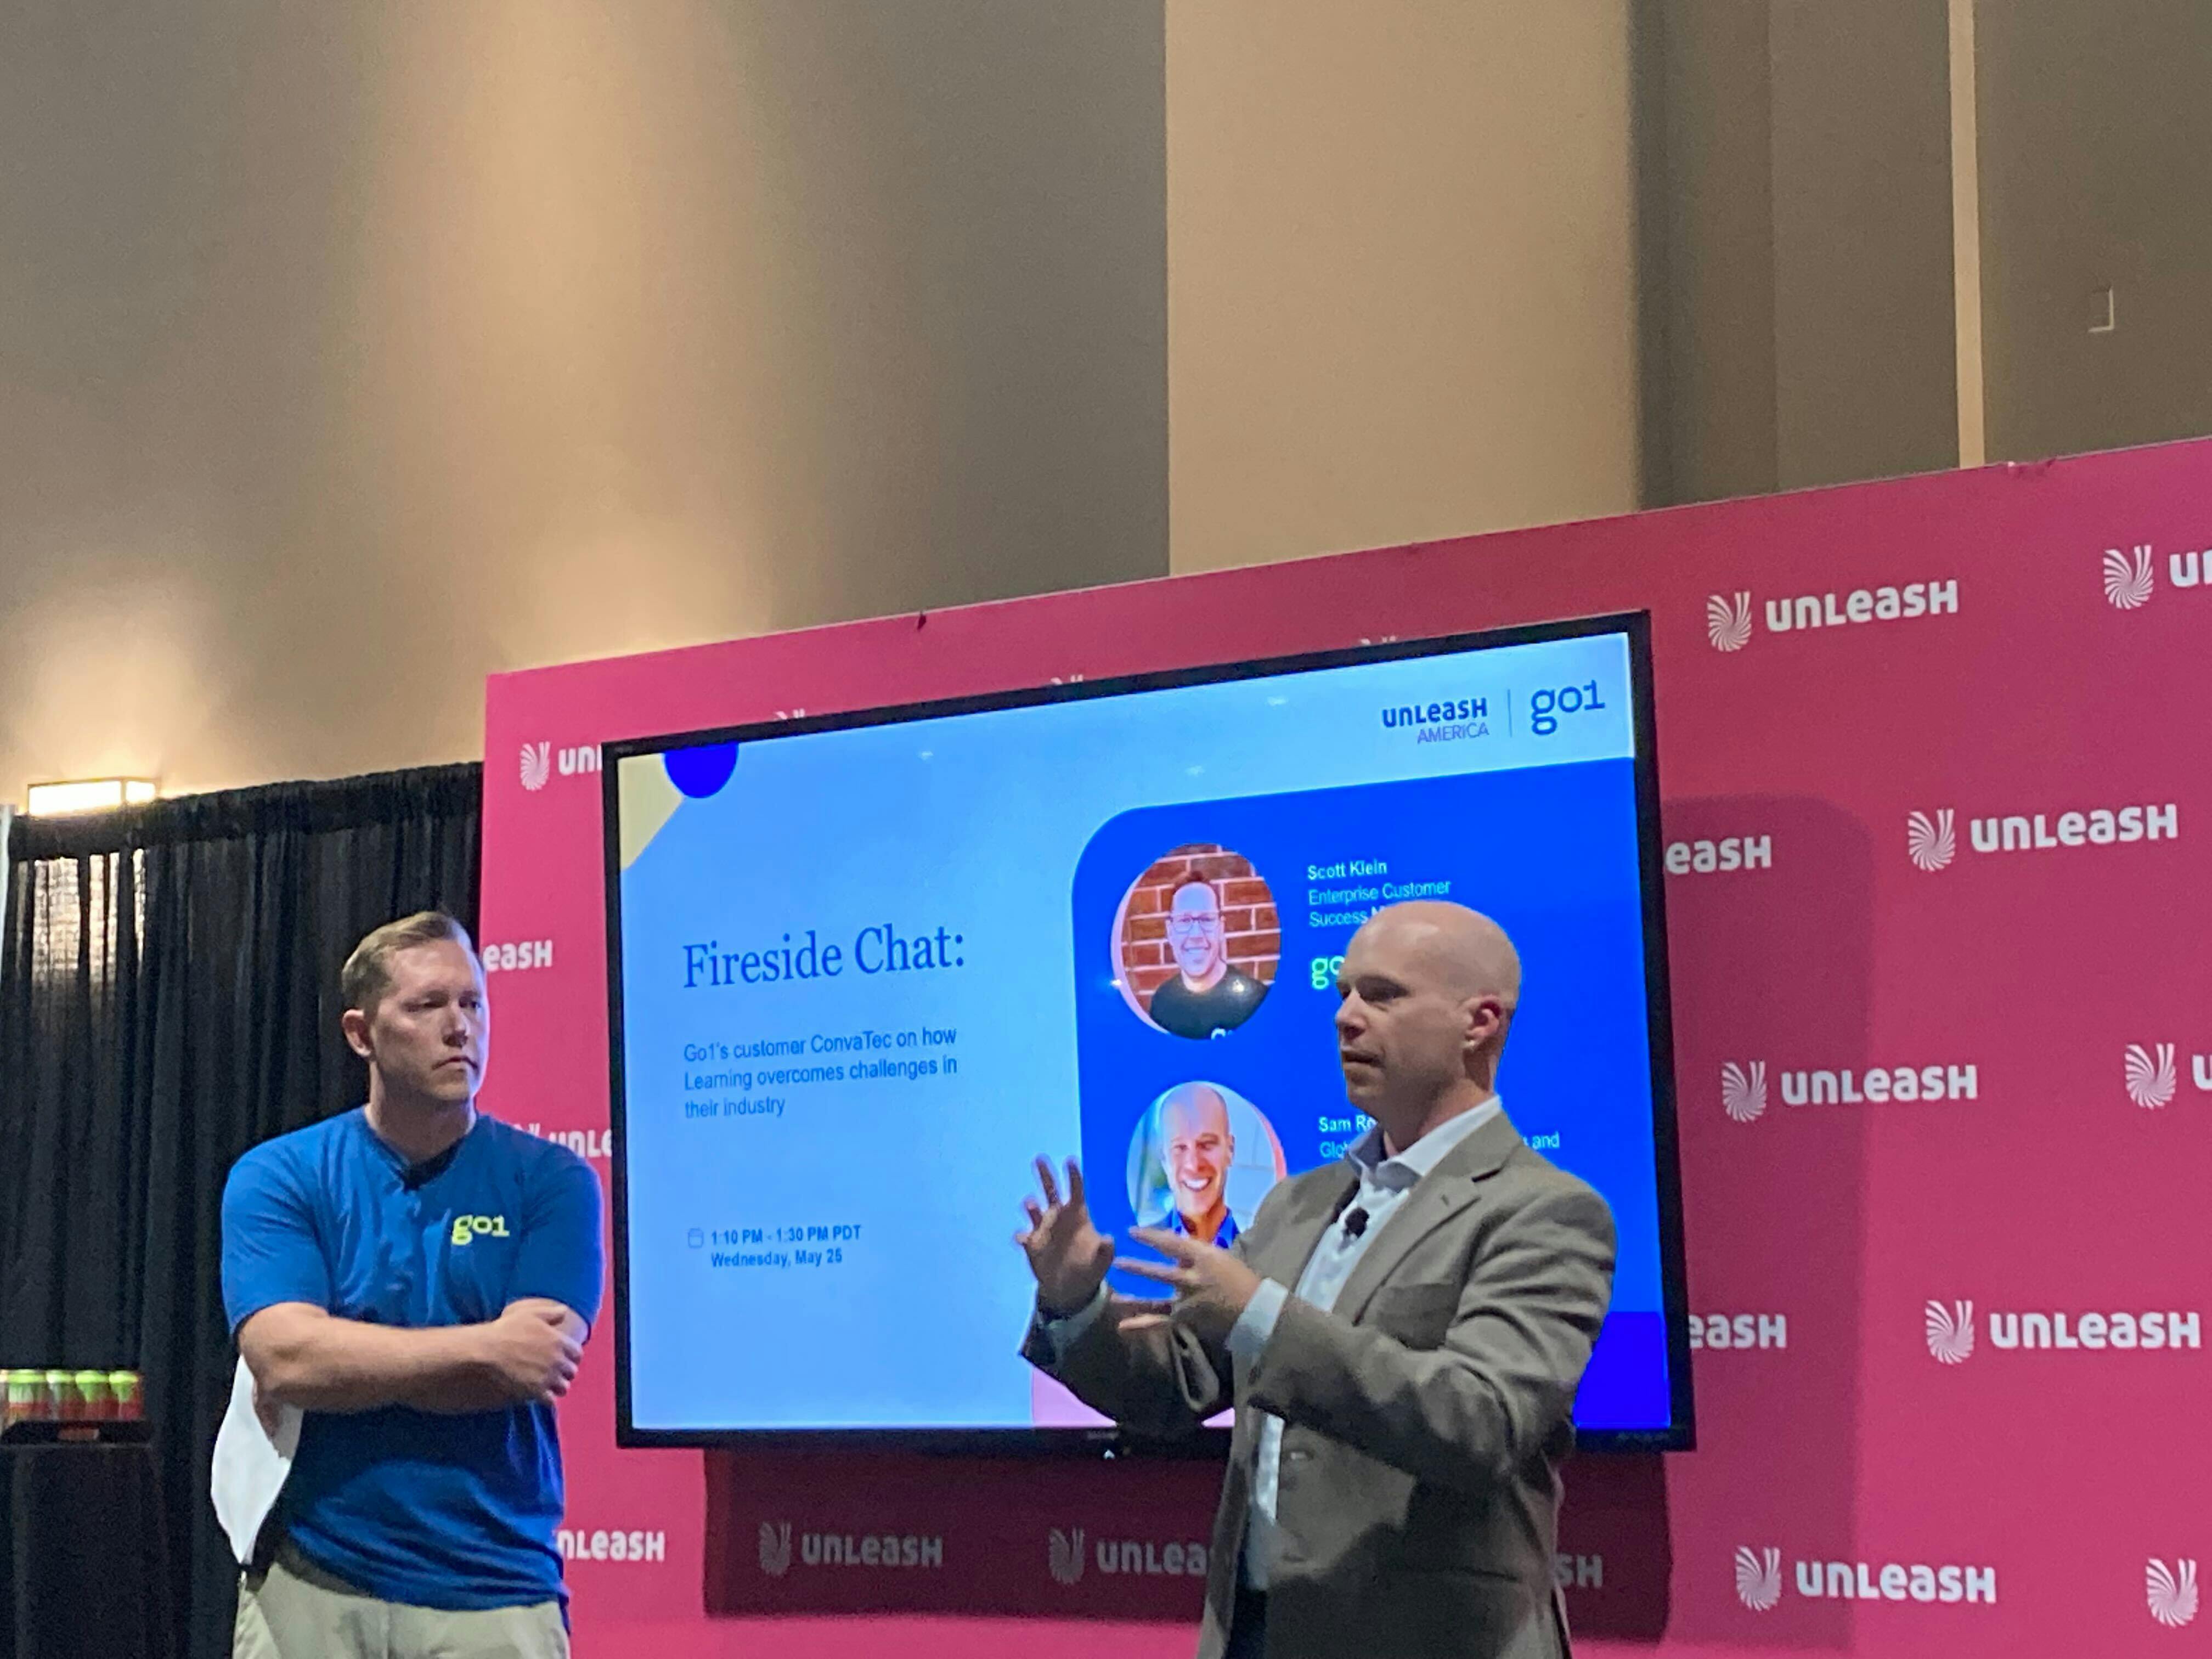 Sam Rogers and Scott Klein at UNLEASH presenting at America conference